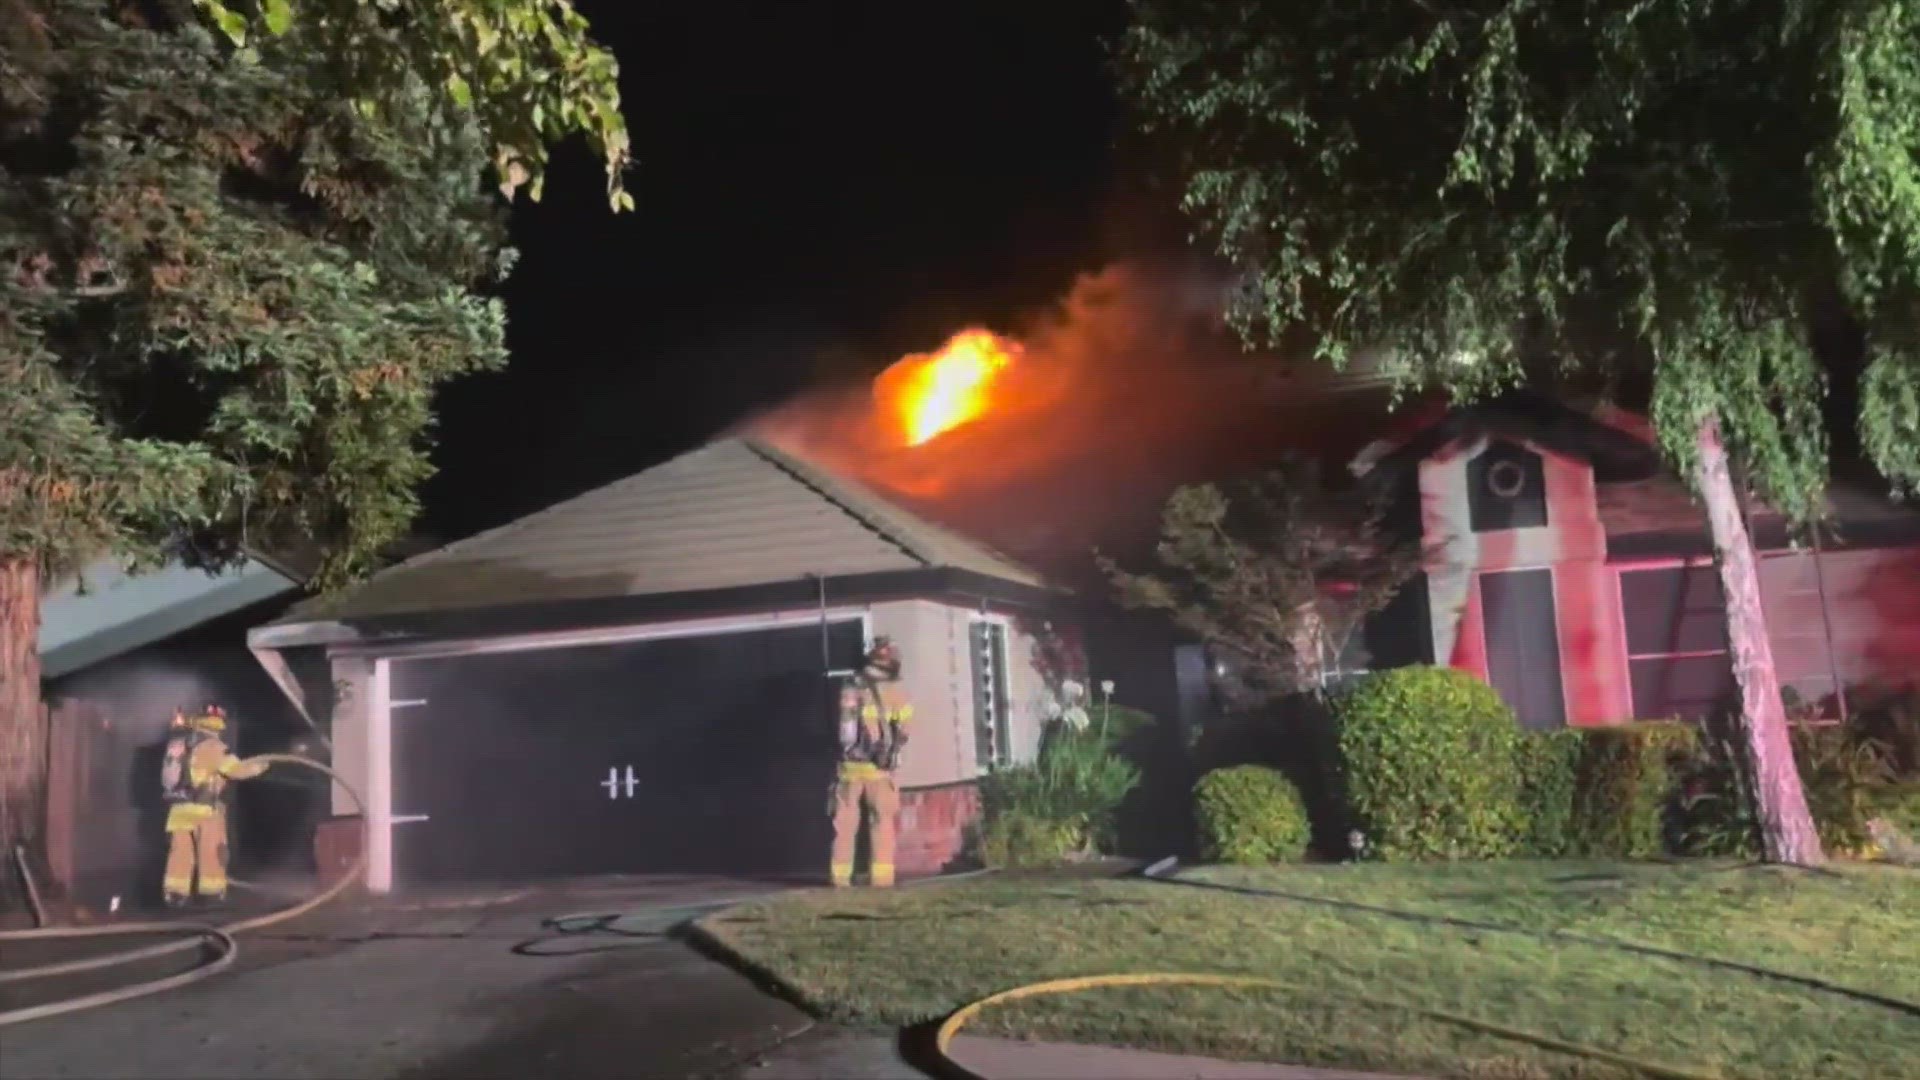 Sacramento fire crews responded to more than 130 calls for fires on the 4th of July. Multiple homes were damaged.